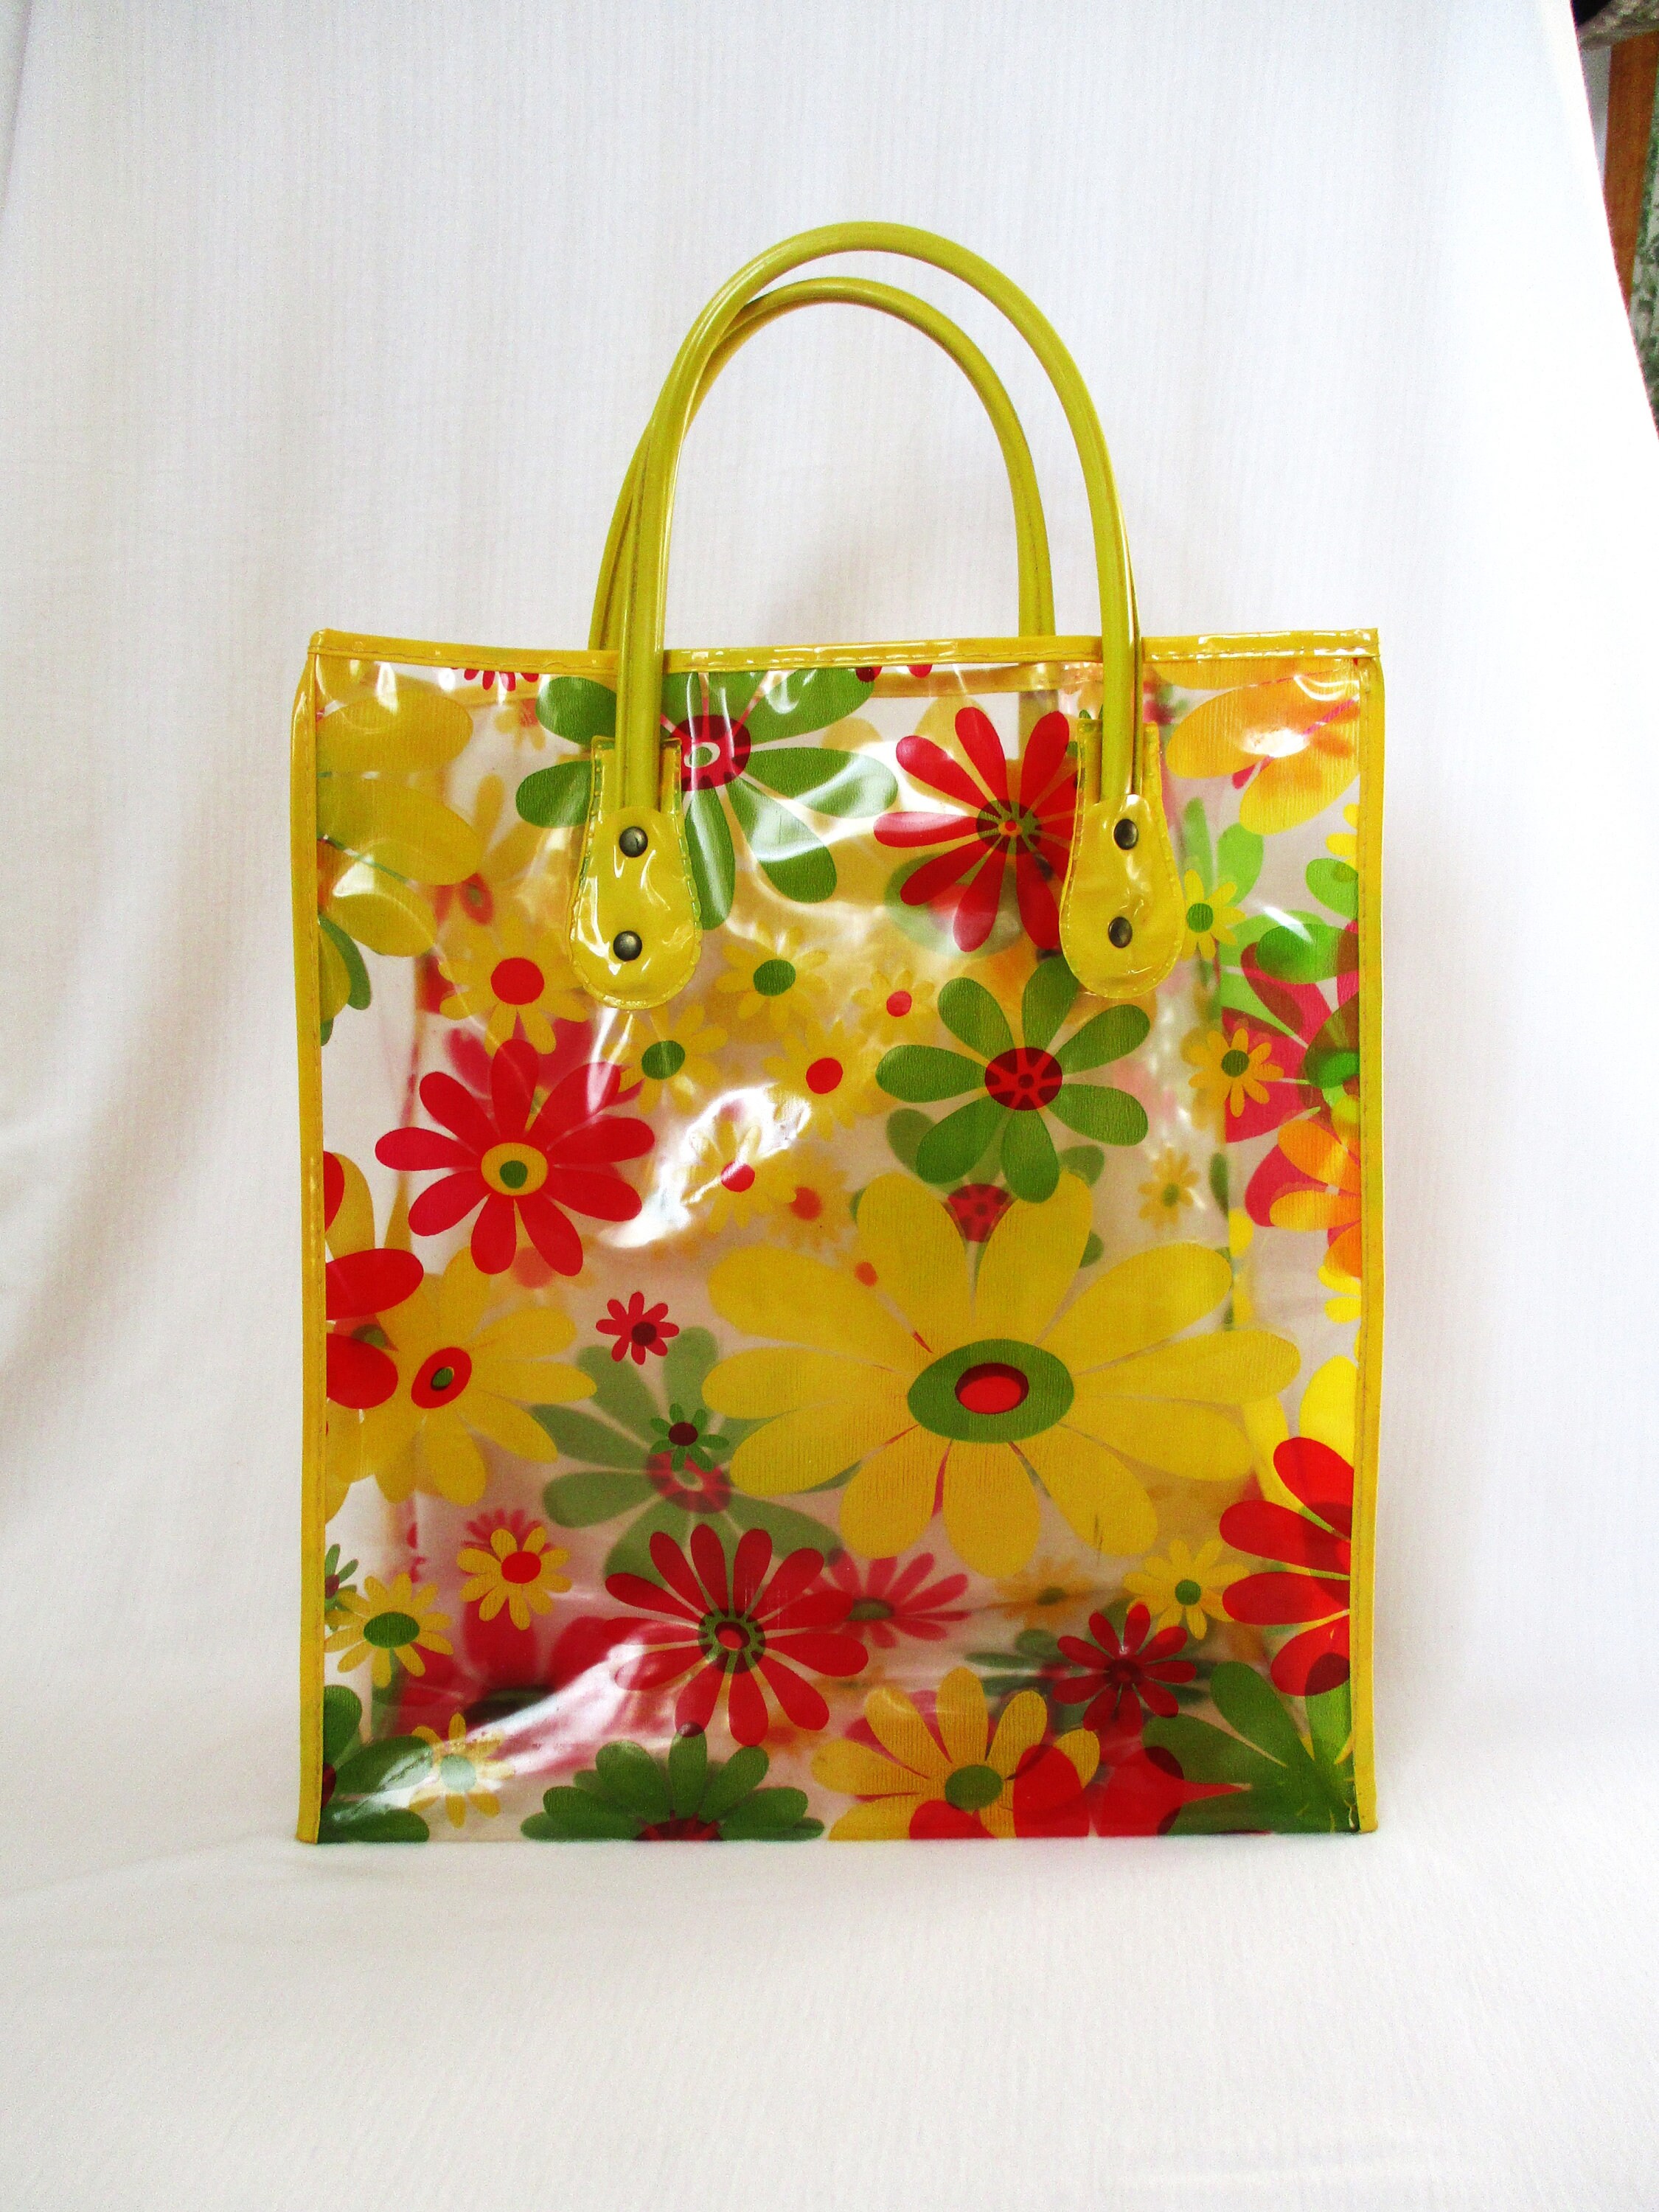 Vintage Goods - Gifts - Clear Vinyl Bags - Floral Items